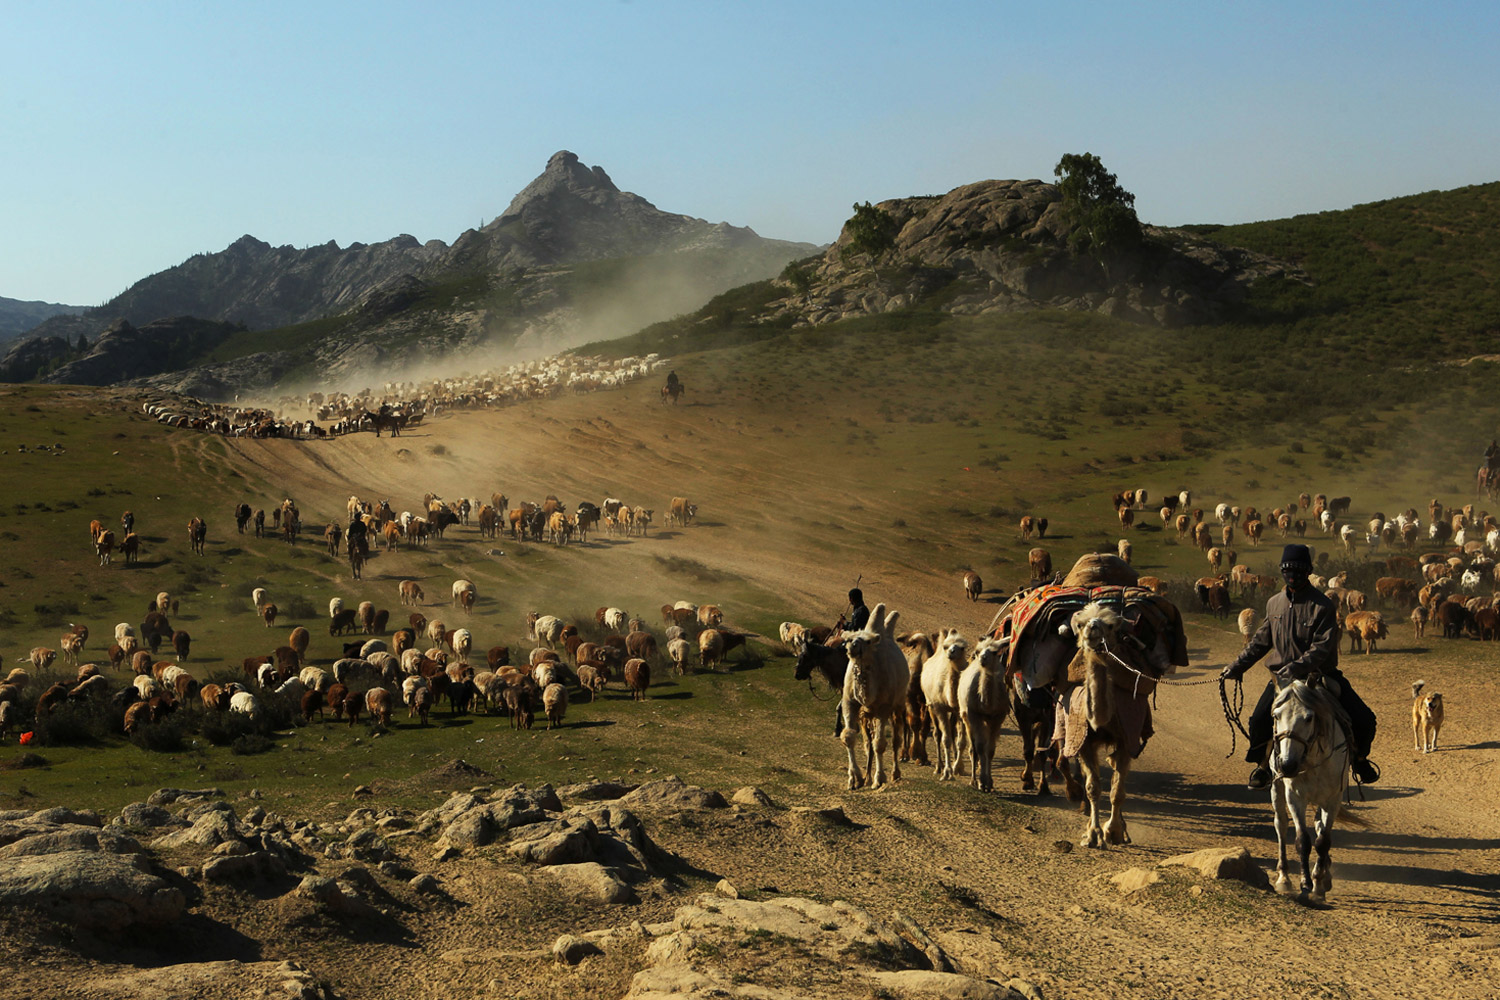 June 2, 2012. Kazakh nomads herd livestock with their caravan across a plain in Altay, in far west China's Xinjiang region.